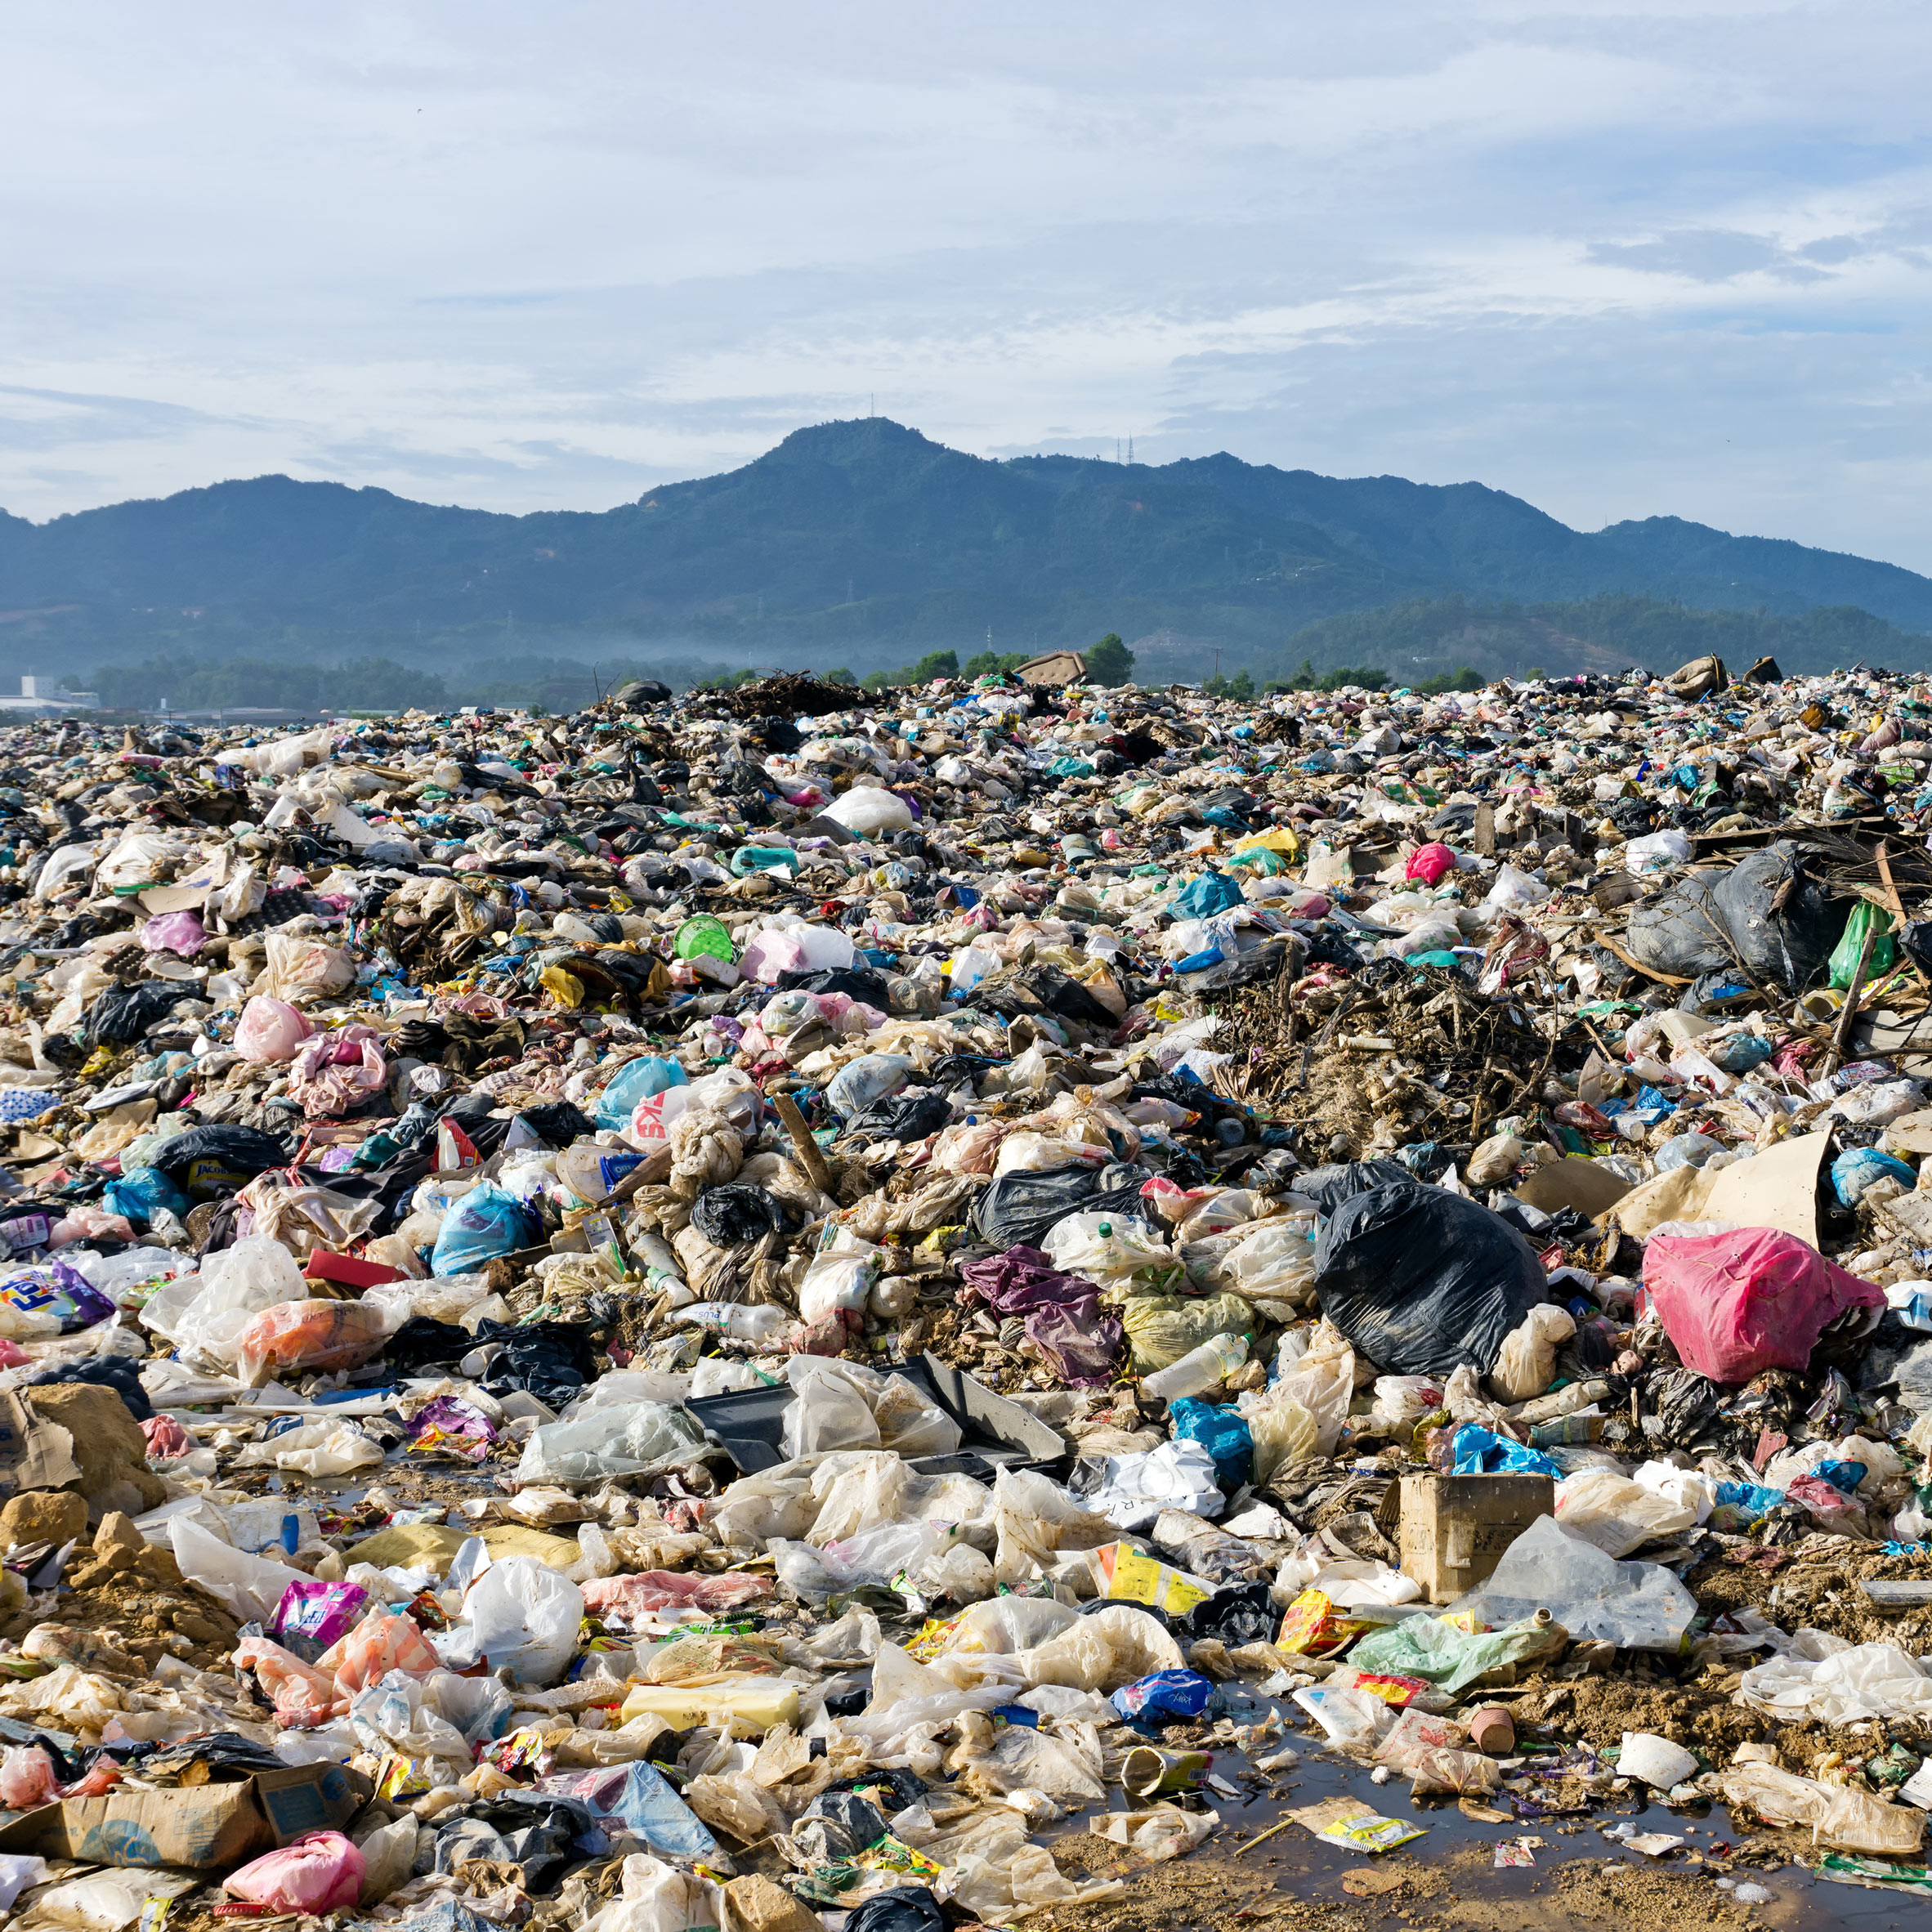 Conventional plastic in soil or the ocean is "largely an aesthetic problem" says Huang. Image is by Shutterstock